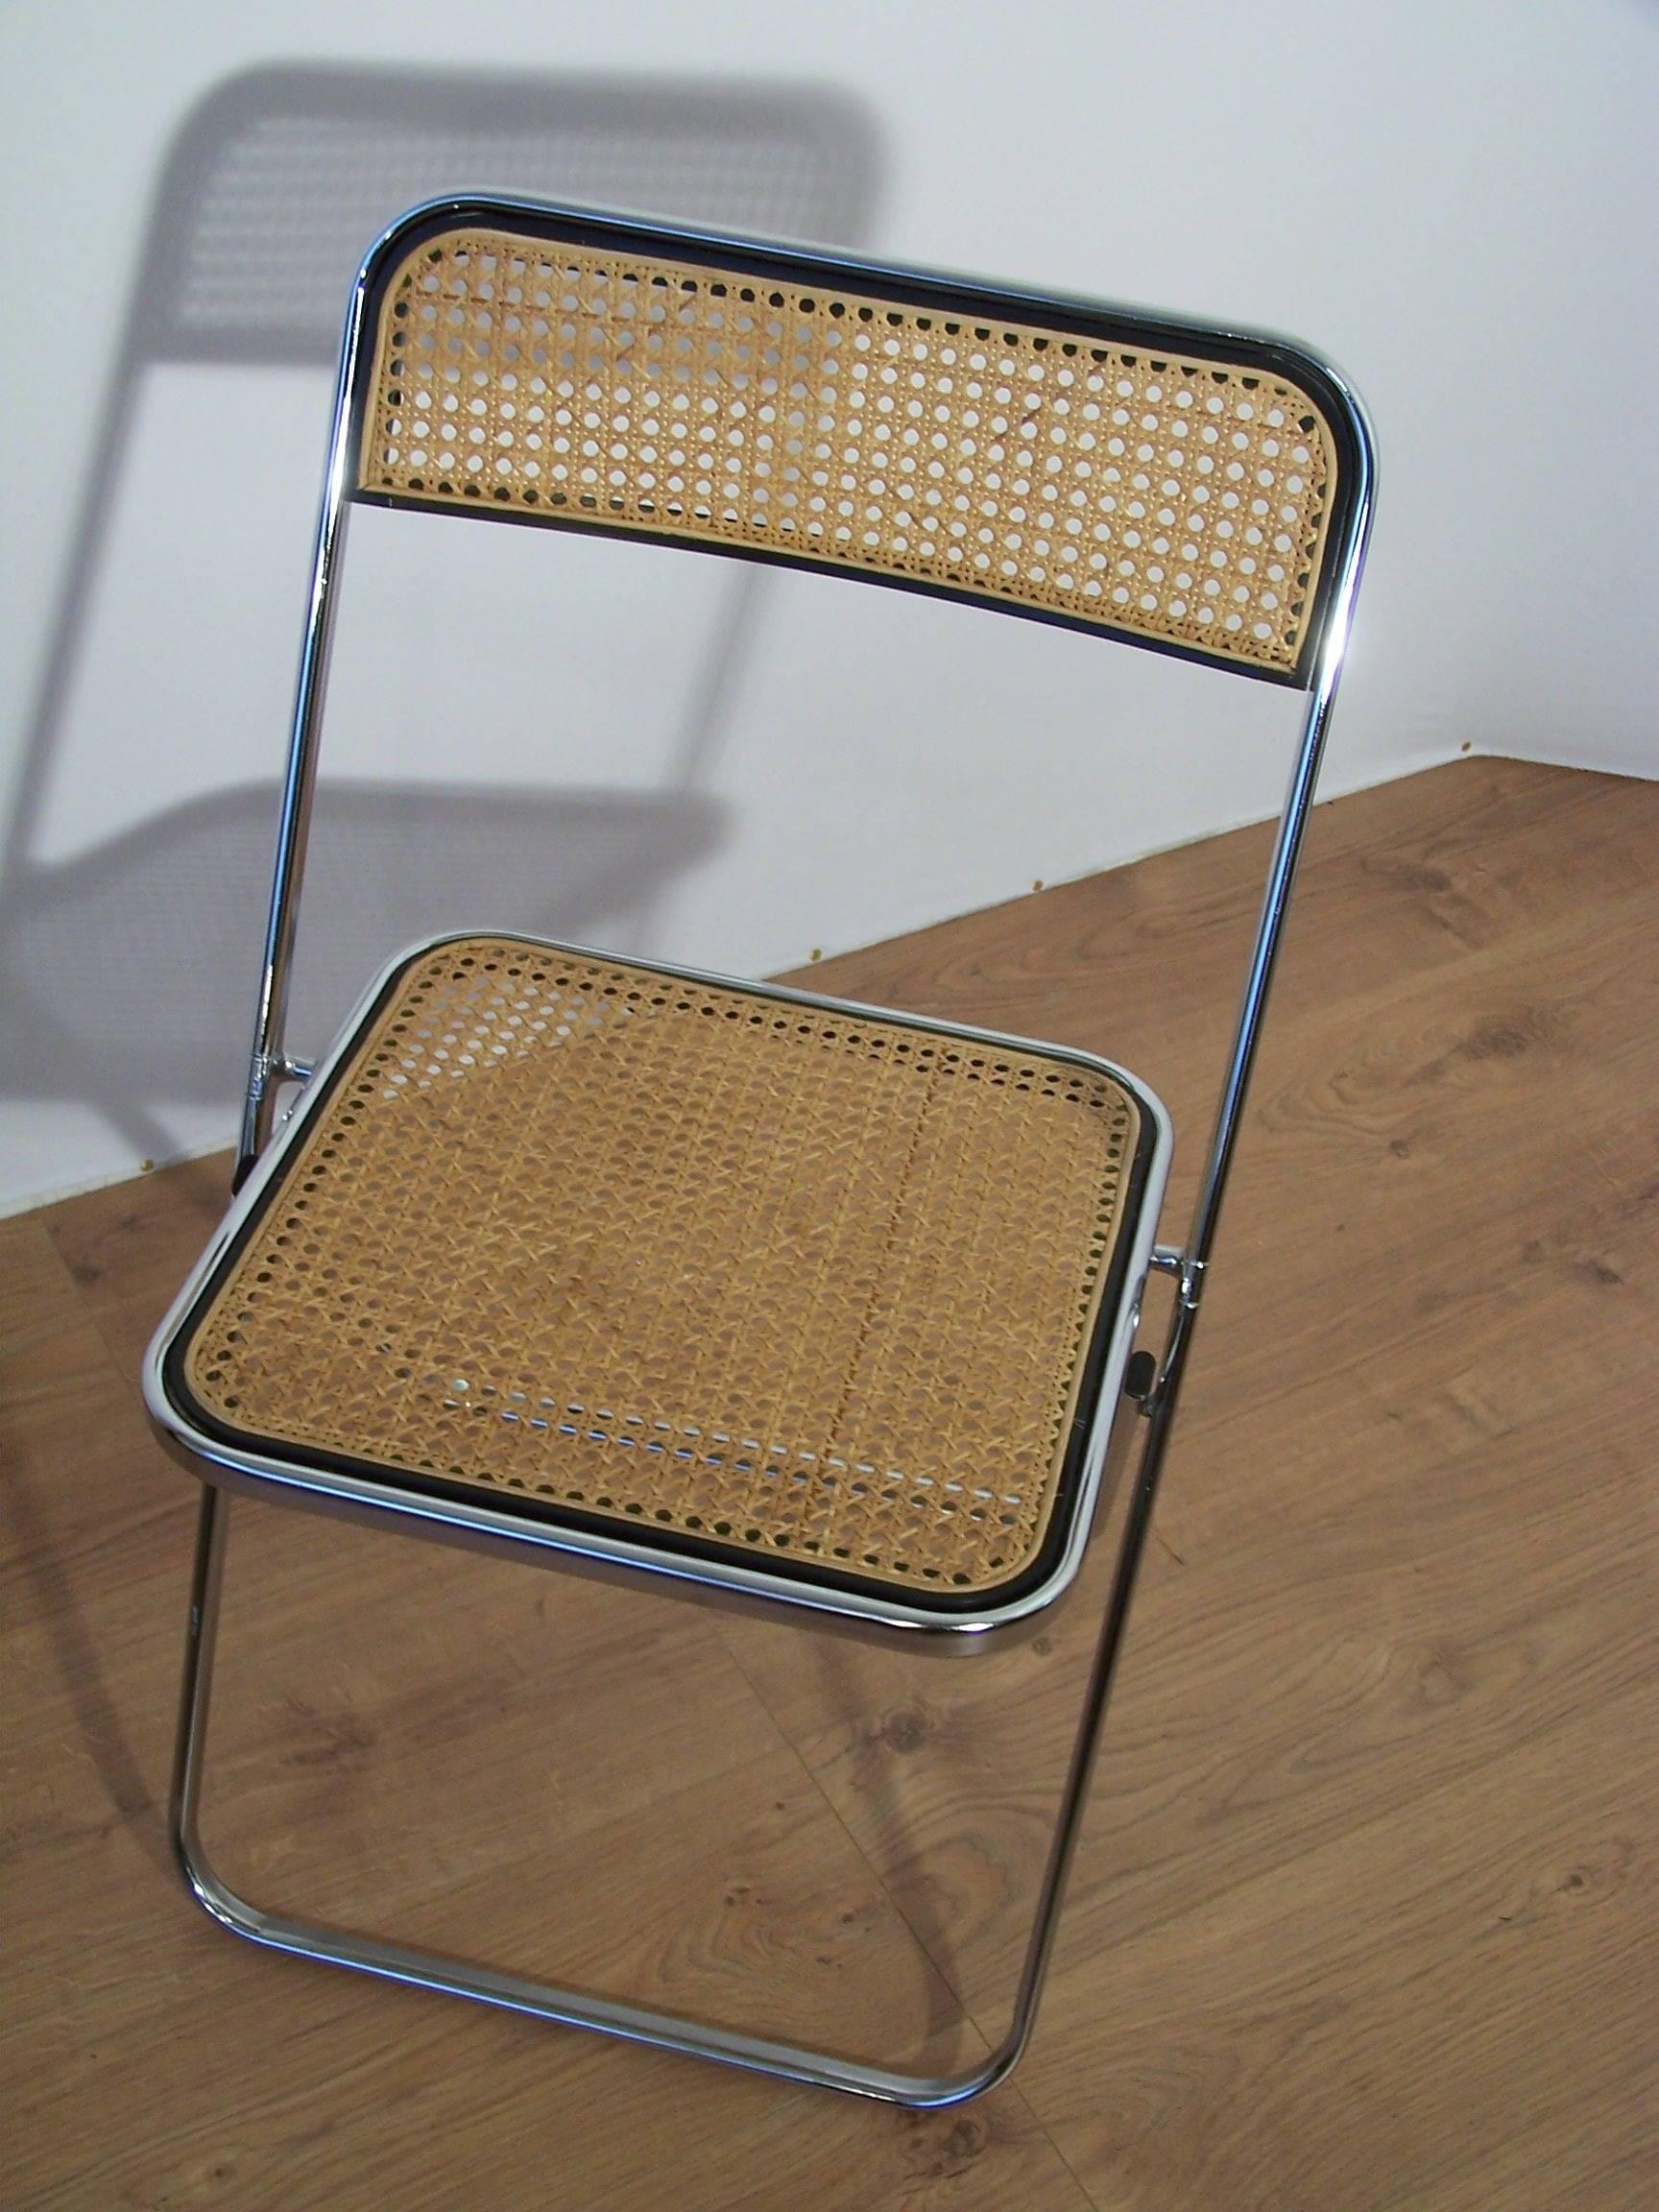 Practical and ultra design, this vintage chair is foldable.
Tribute to the iconic and famous Plia by Giancarlo Piretti, it has a chrome structure, a seat and a curved wicker back.